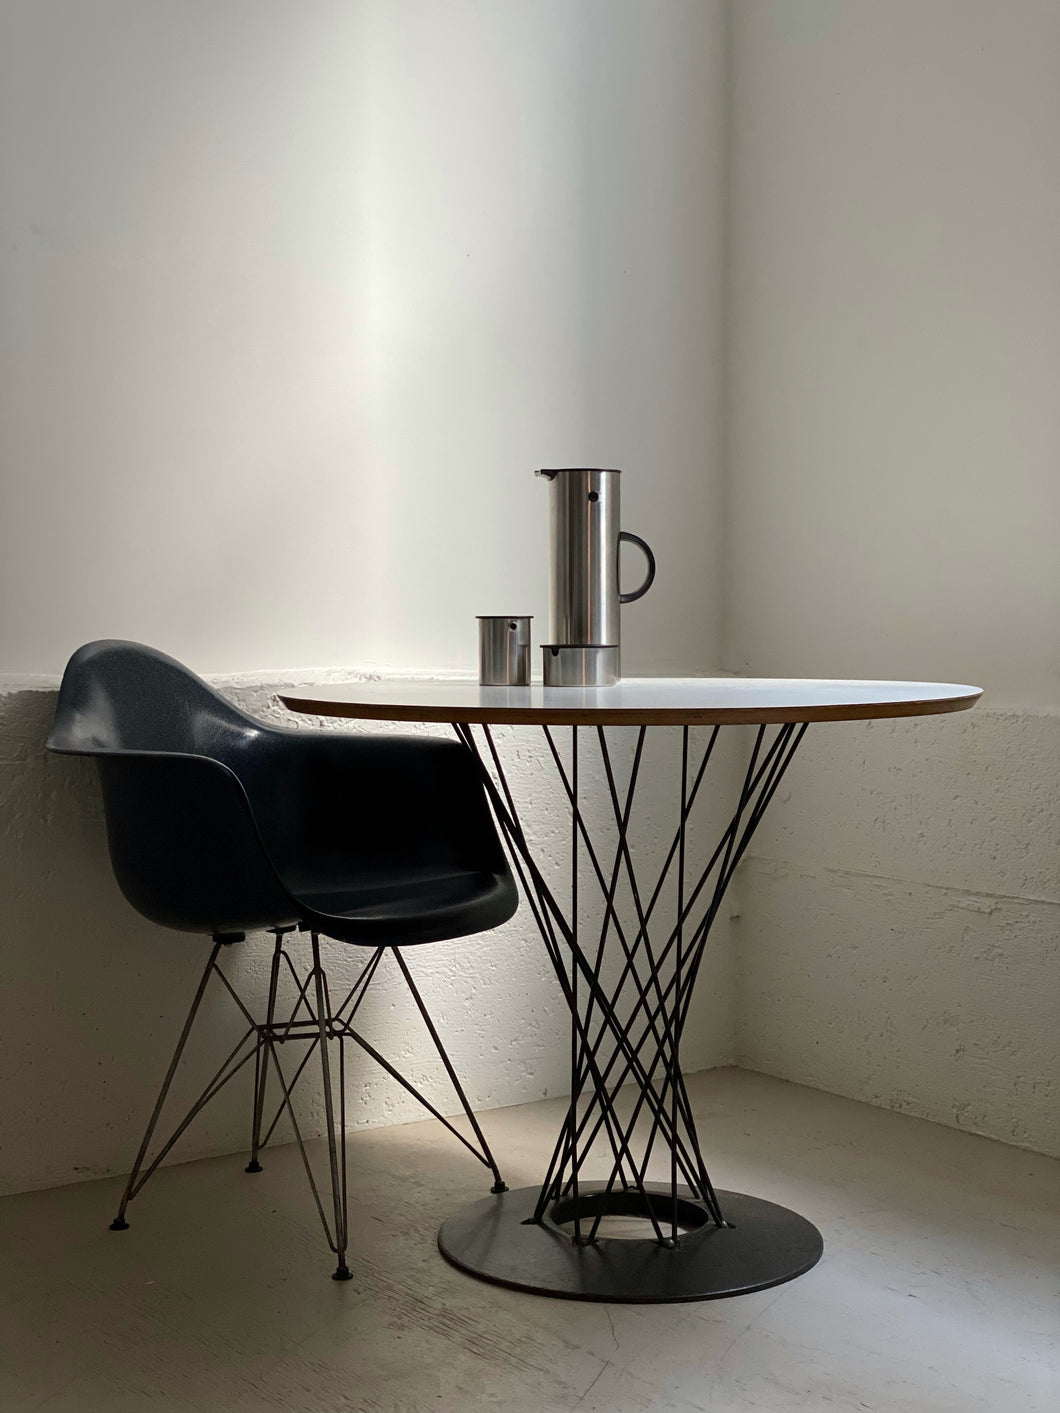 Cyclone dining table by Isamu Noguchi for Knoll